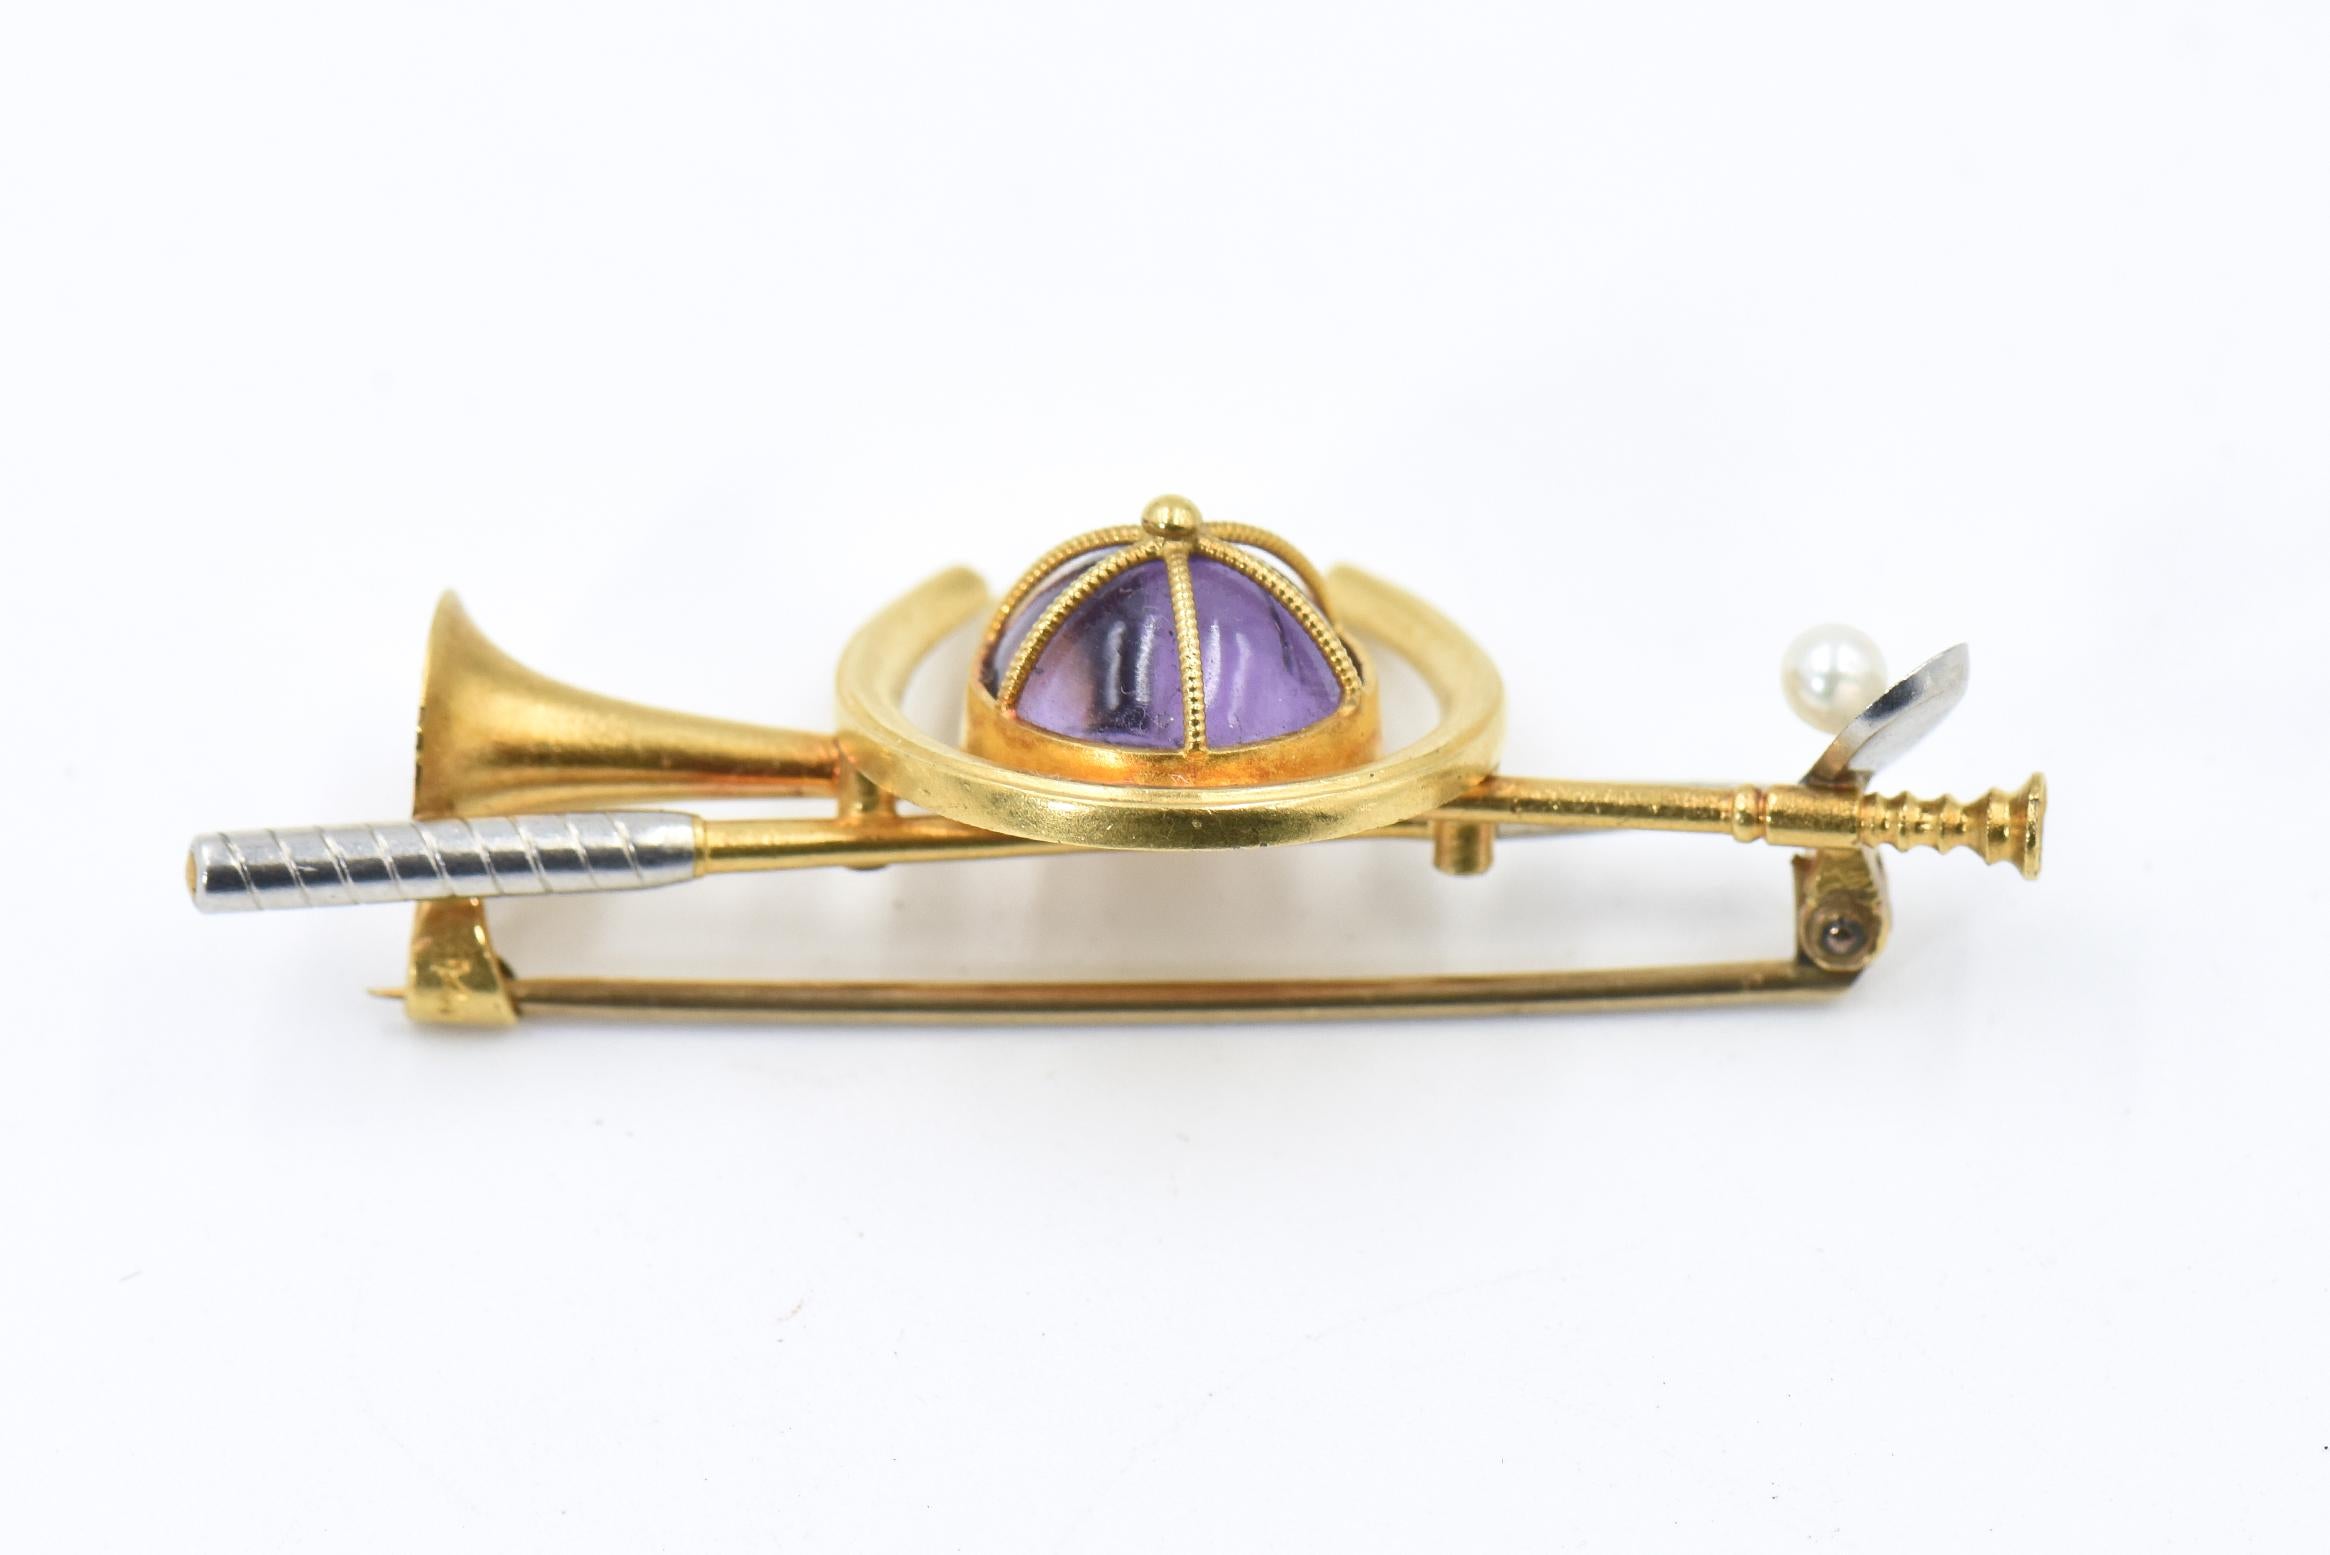 Fantastic Victorian equestrian pin that represents all types of equestrian activities - there is a jockey cap with a cabochon amethyst, a polo stick with a cultured pearl ball, a horse shoe and a hunting horn.  The back has a 